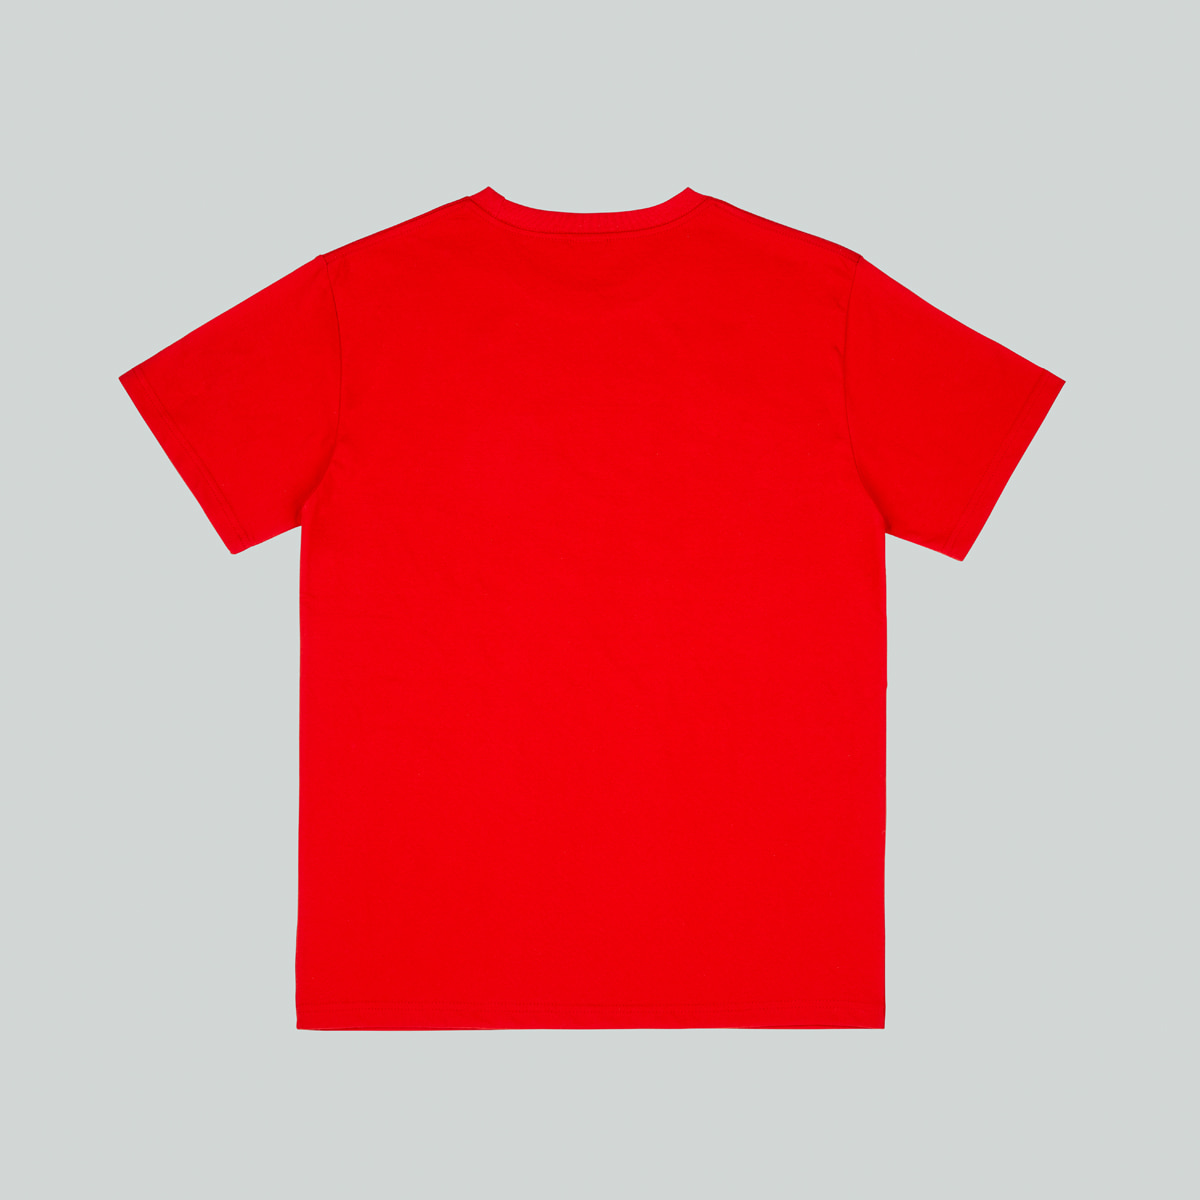 [LIFE ACHIVE] LIFE LETTER LOGO T-SHIRT &#039;RED&#039;